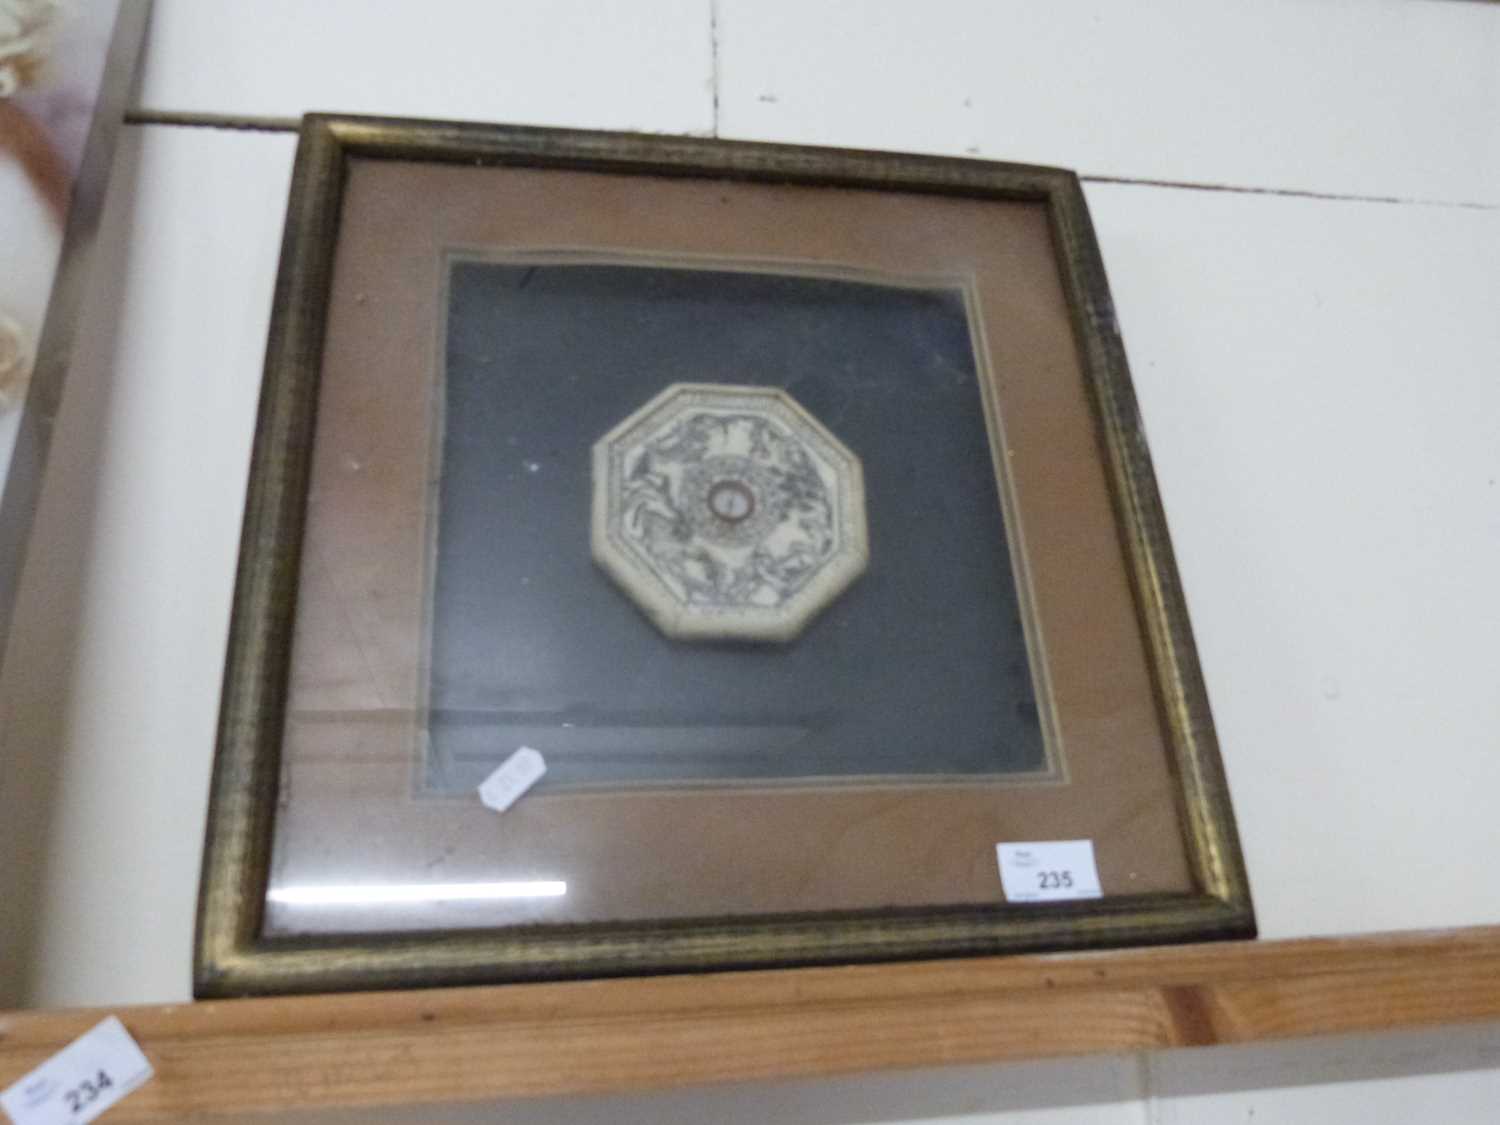 Contemporary Chinese framed compass